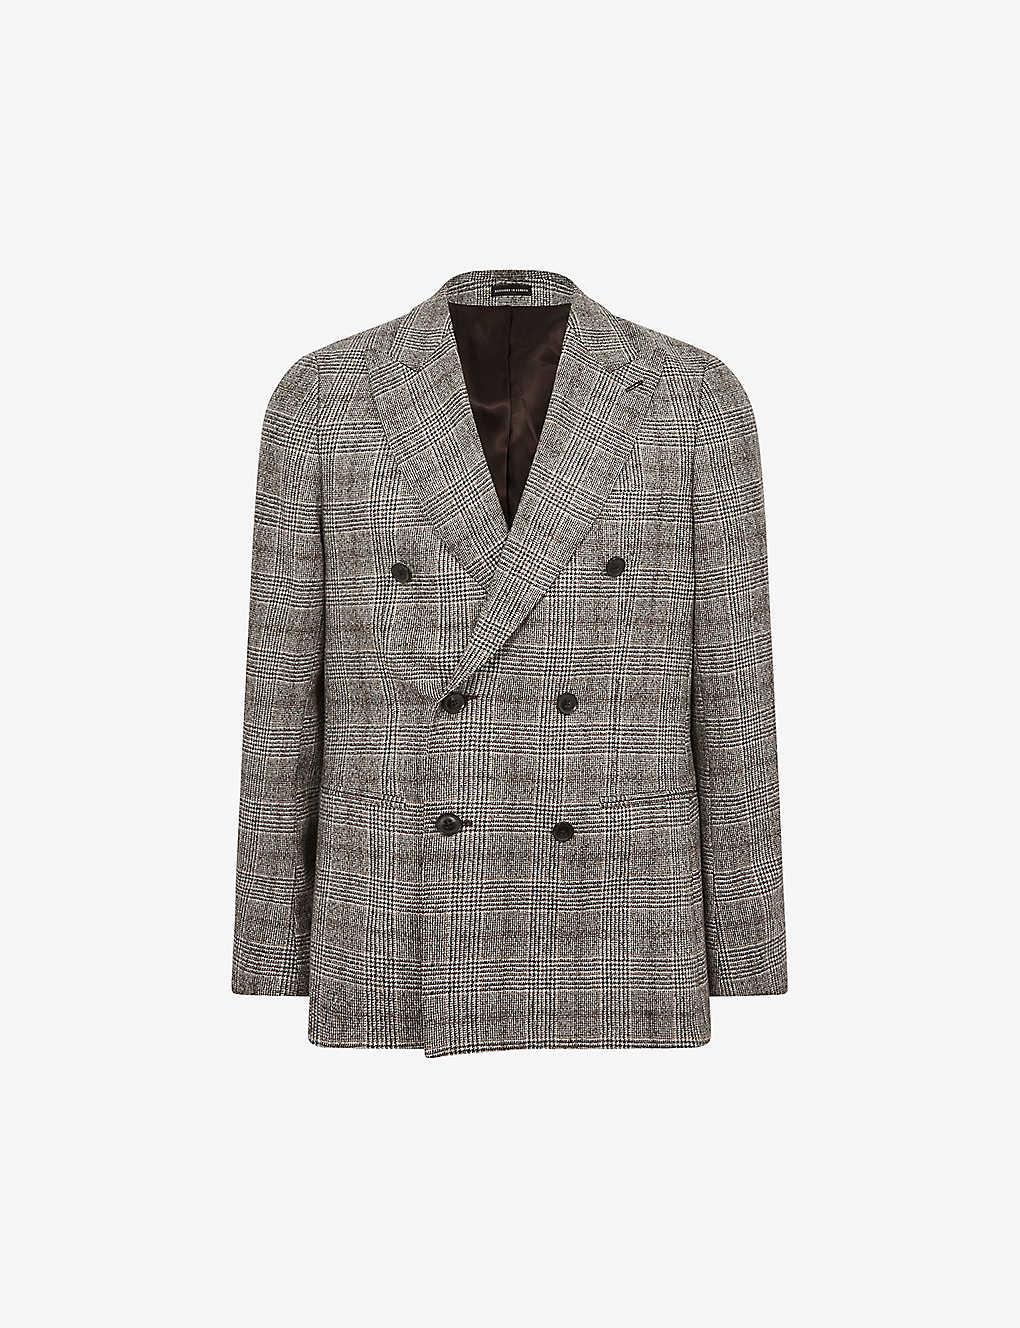 Reiss Alfredo Prince Of Wales-check Wool Blazer in Gray for Men | Lyst